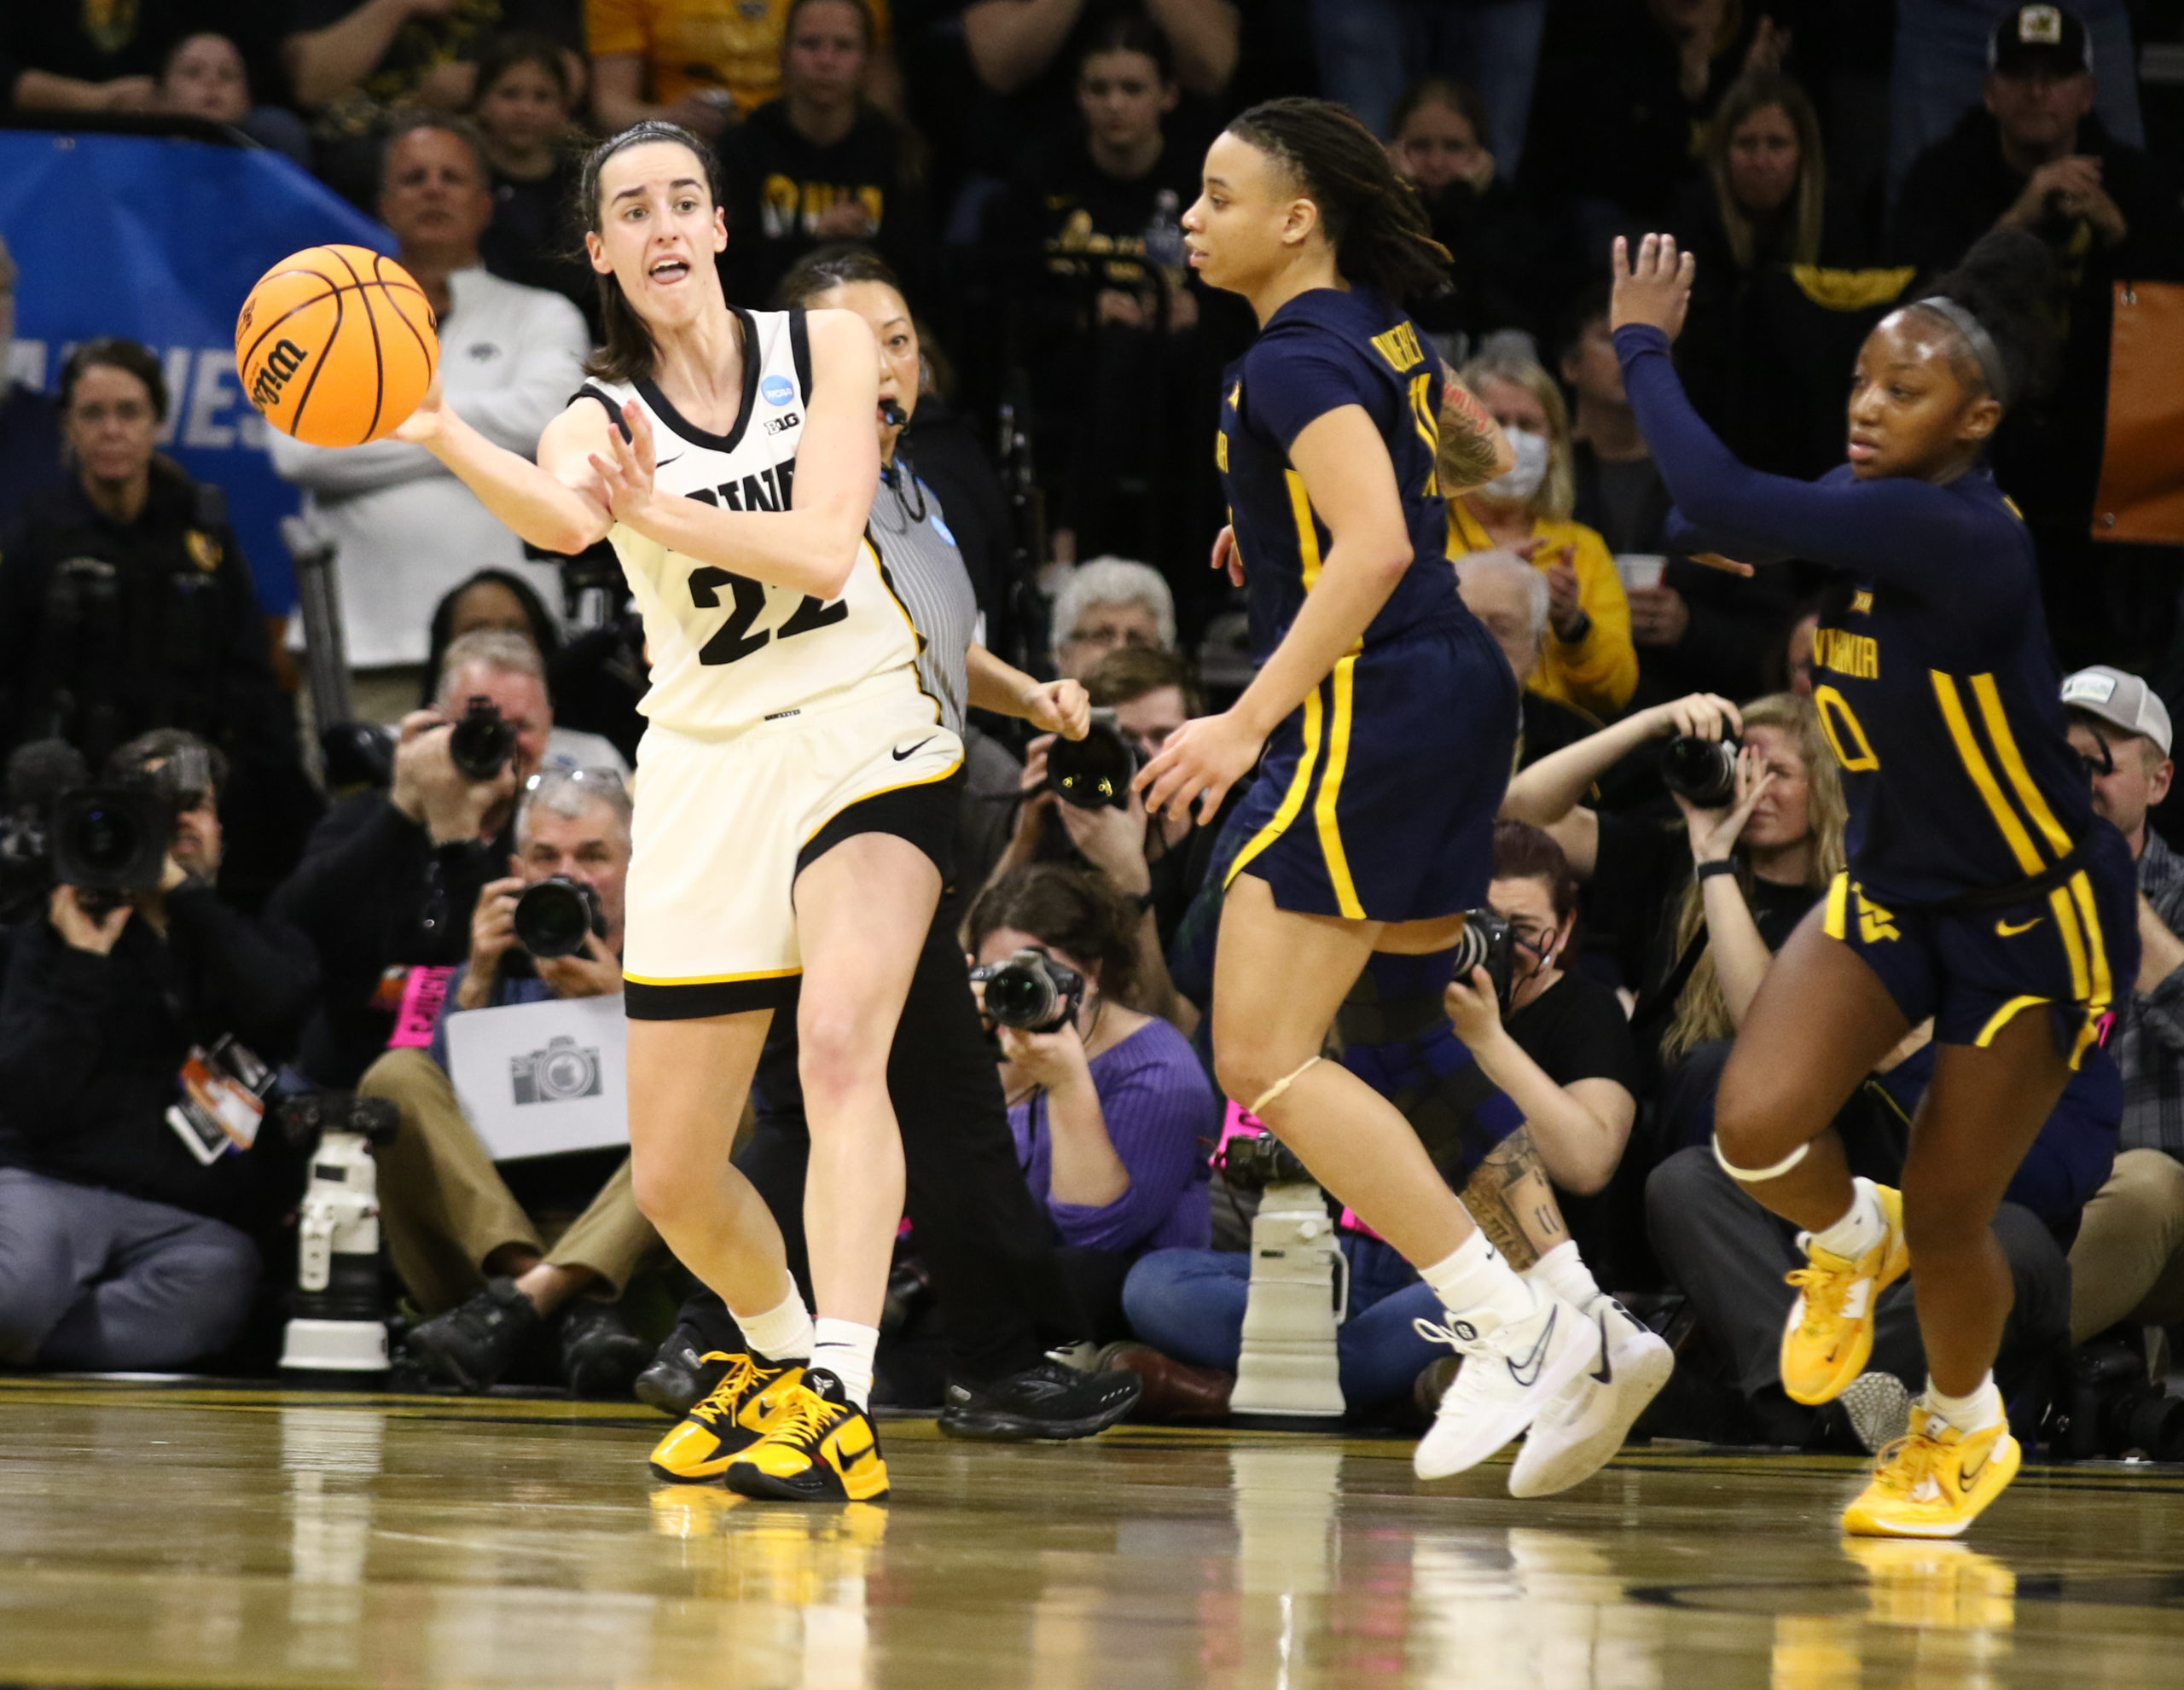 IOWA CITY, IOWA- MARCH 25: Guard Caitlin Clark #22 of the Iowa Hawkeyes passes the ball in the second half against guard J.J. Quinerly #11 of the West Virginia Mountaineers during their second round match-up in the 2024 NCAA Division 1 Women's Basketball Championship at Carver-Hawkeye Arena on March 25, 2024 in Iowa City, Iowa. Matthew Holst/Getty Images